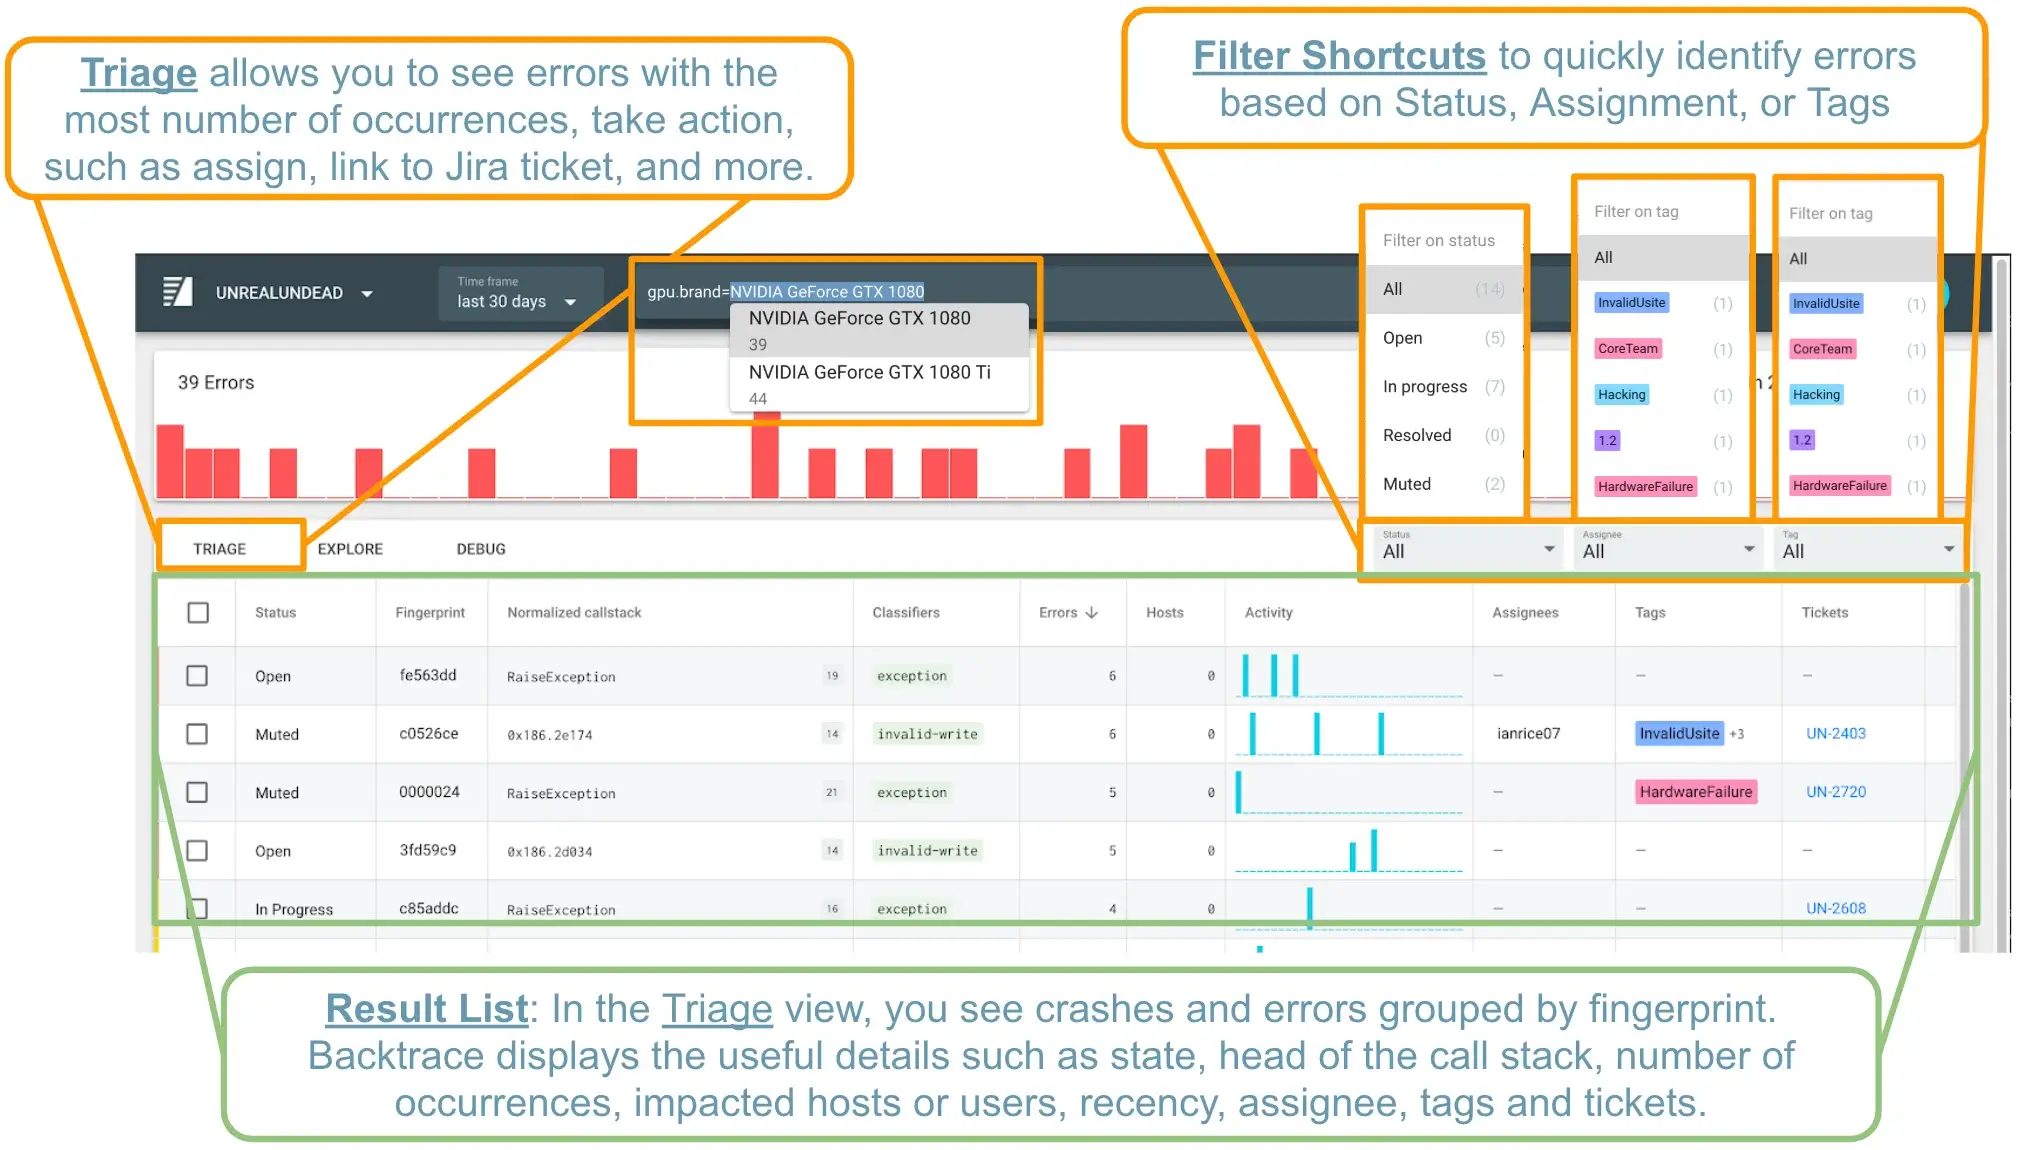 The Triage view allows you to see errors with the most number of occurrences and take action.